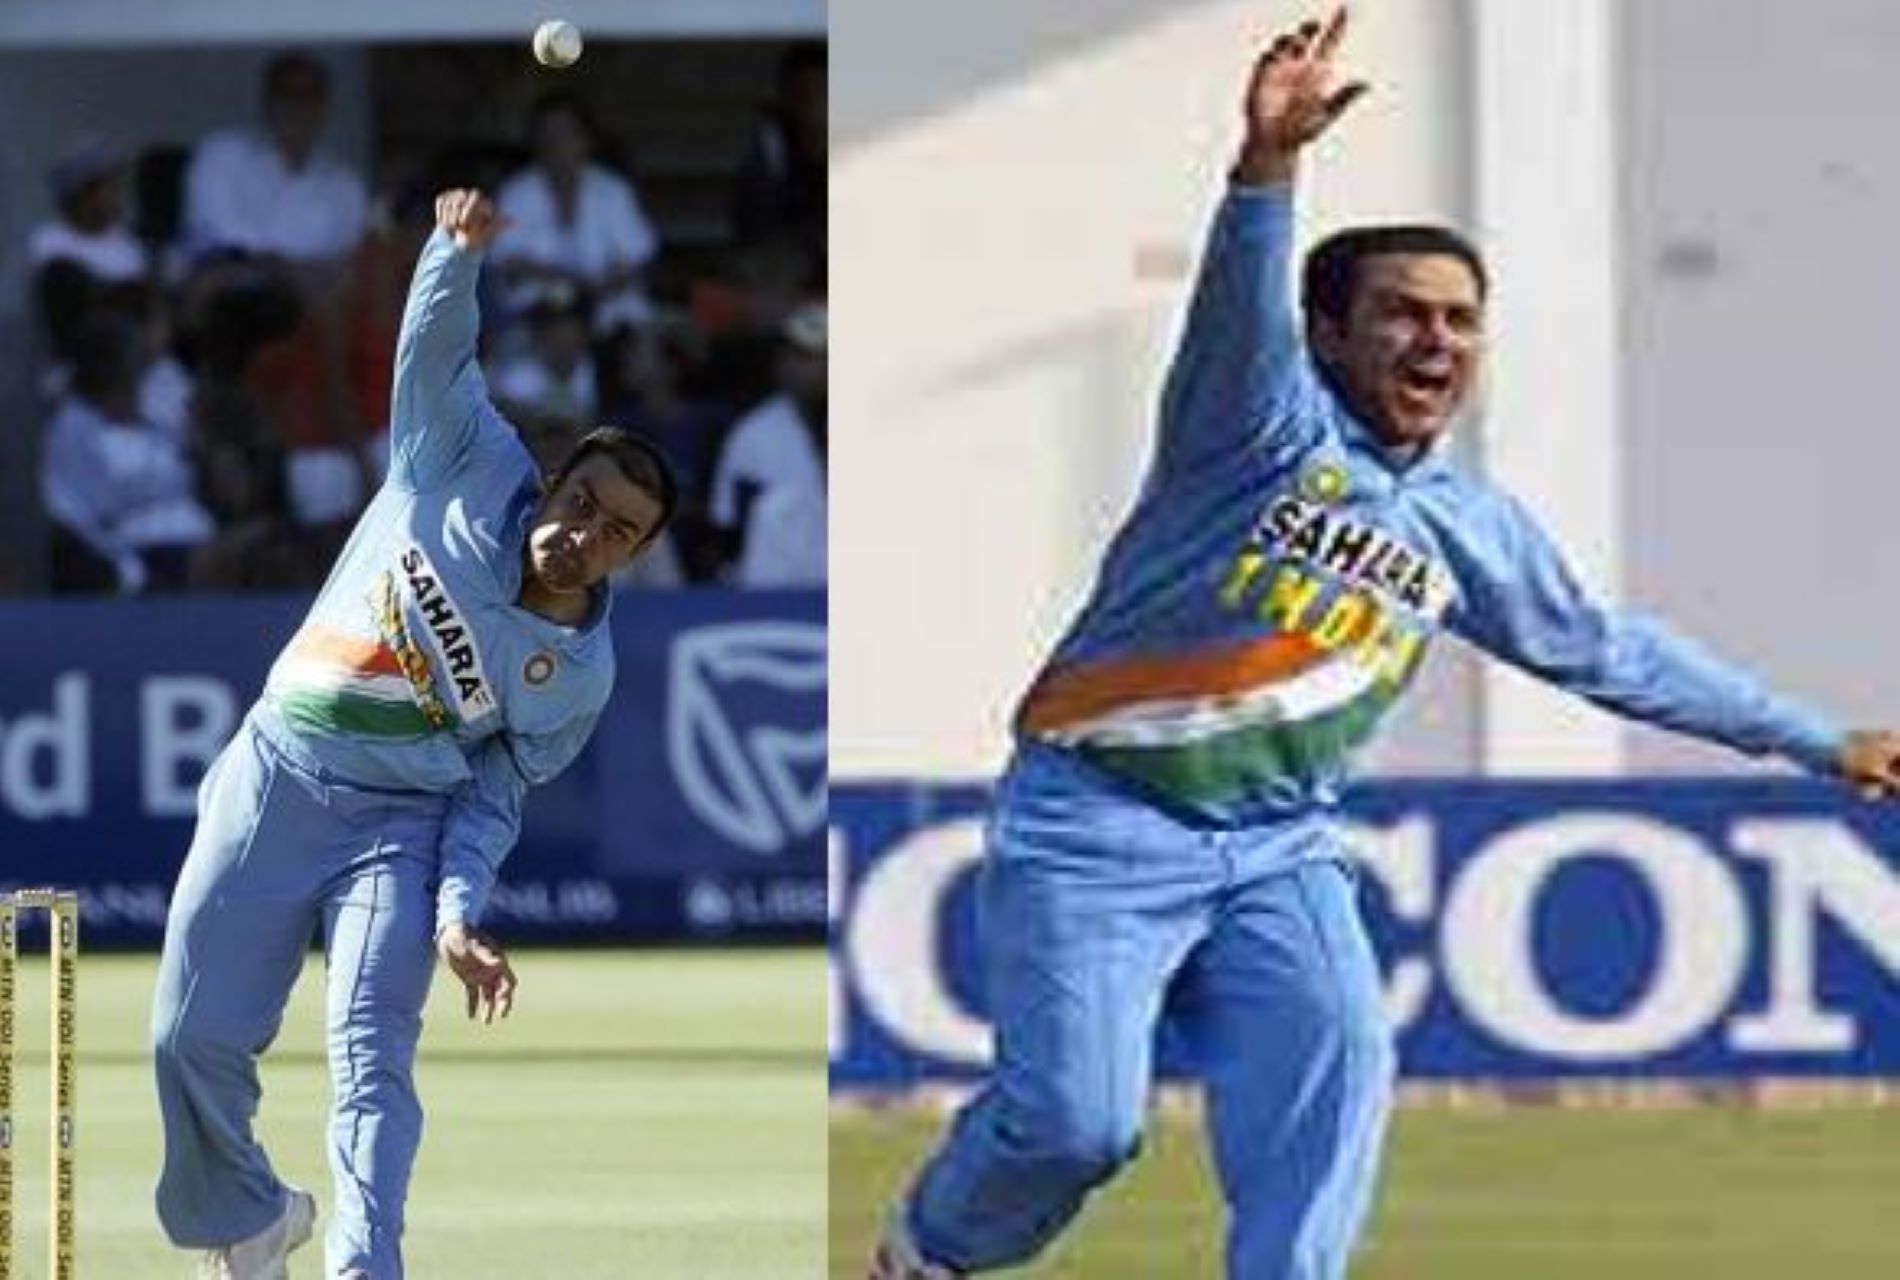 Sehwag had the uncanny knack of picking up crucial wickets.